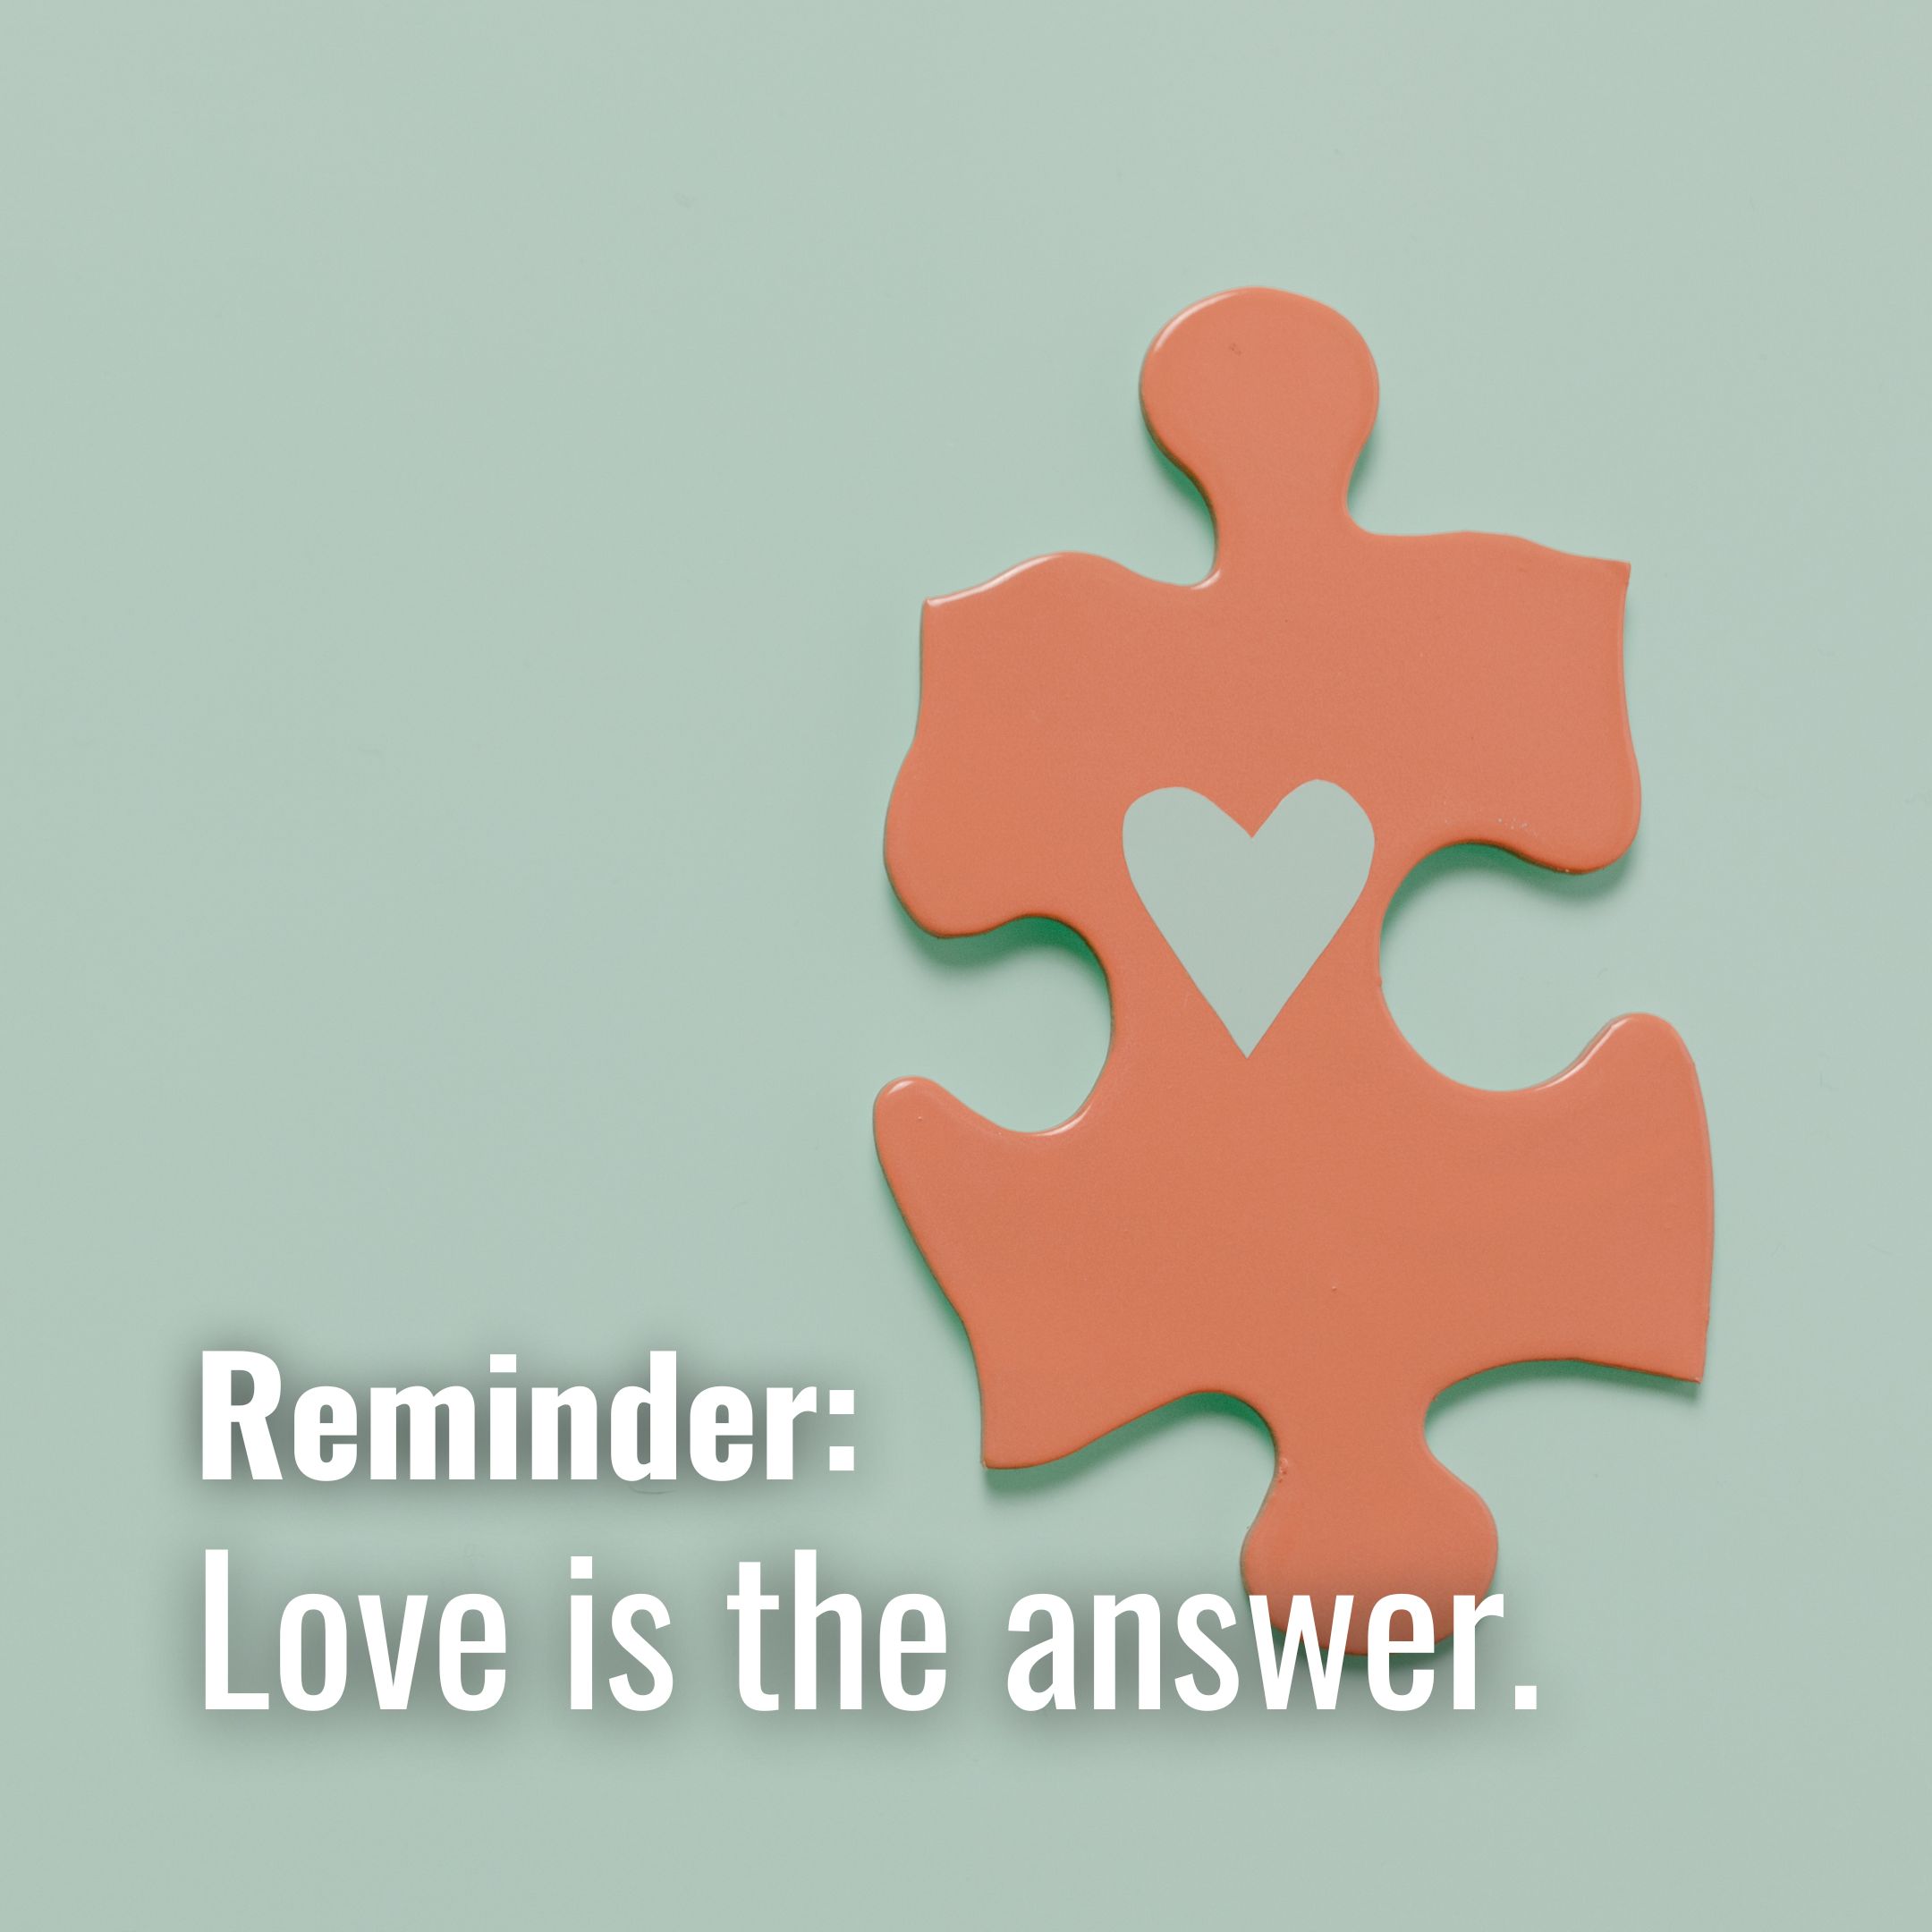 Love is the answer.